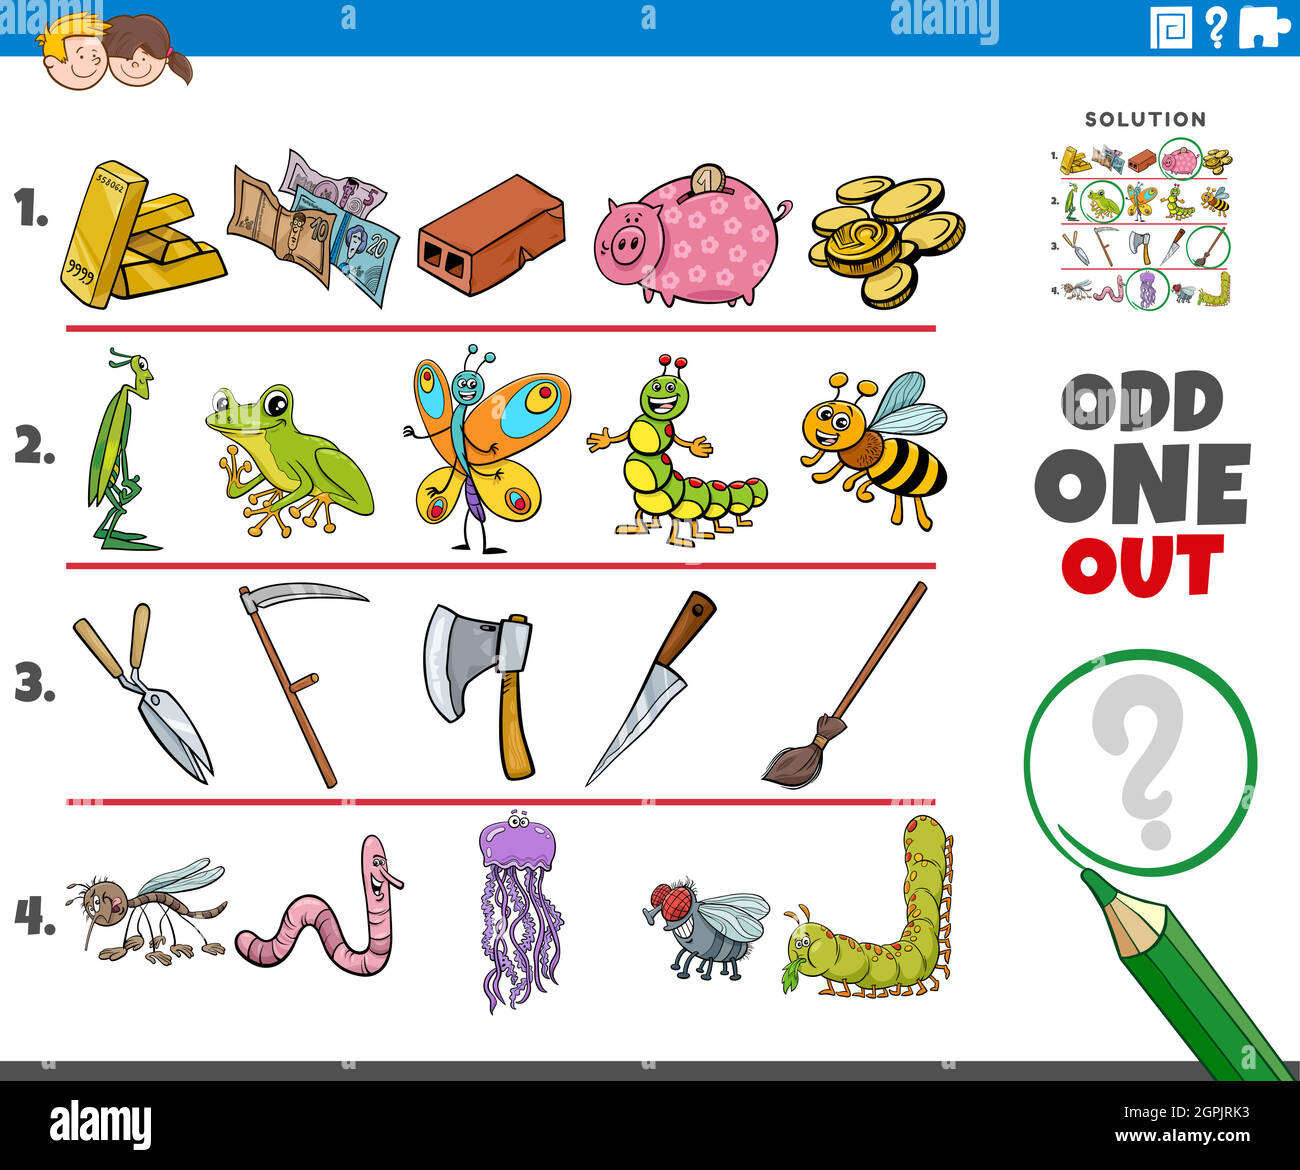 odd one out picture game with cartoon objects and animals Stock Vector